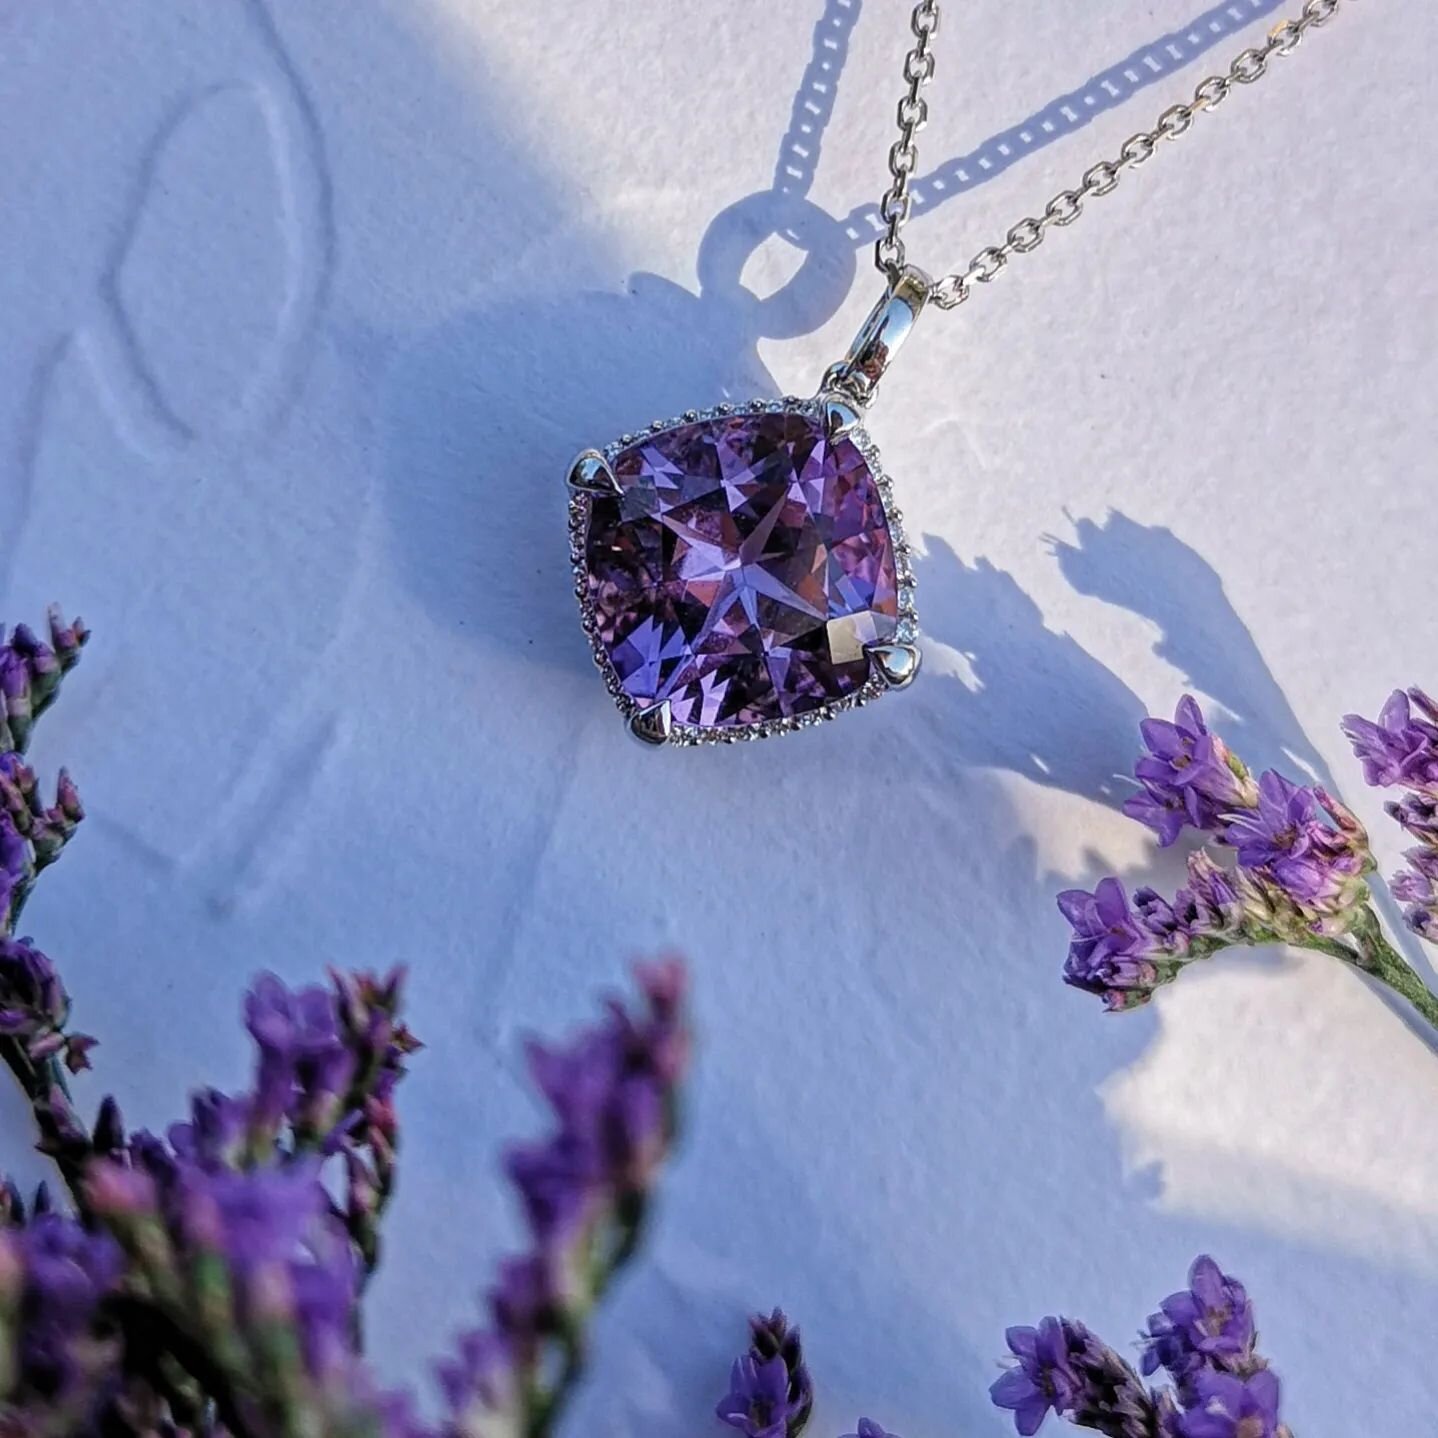 The alluring, the romantic and the subtle elegance of the Amethyst make such a necklace a must have piece! 💎